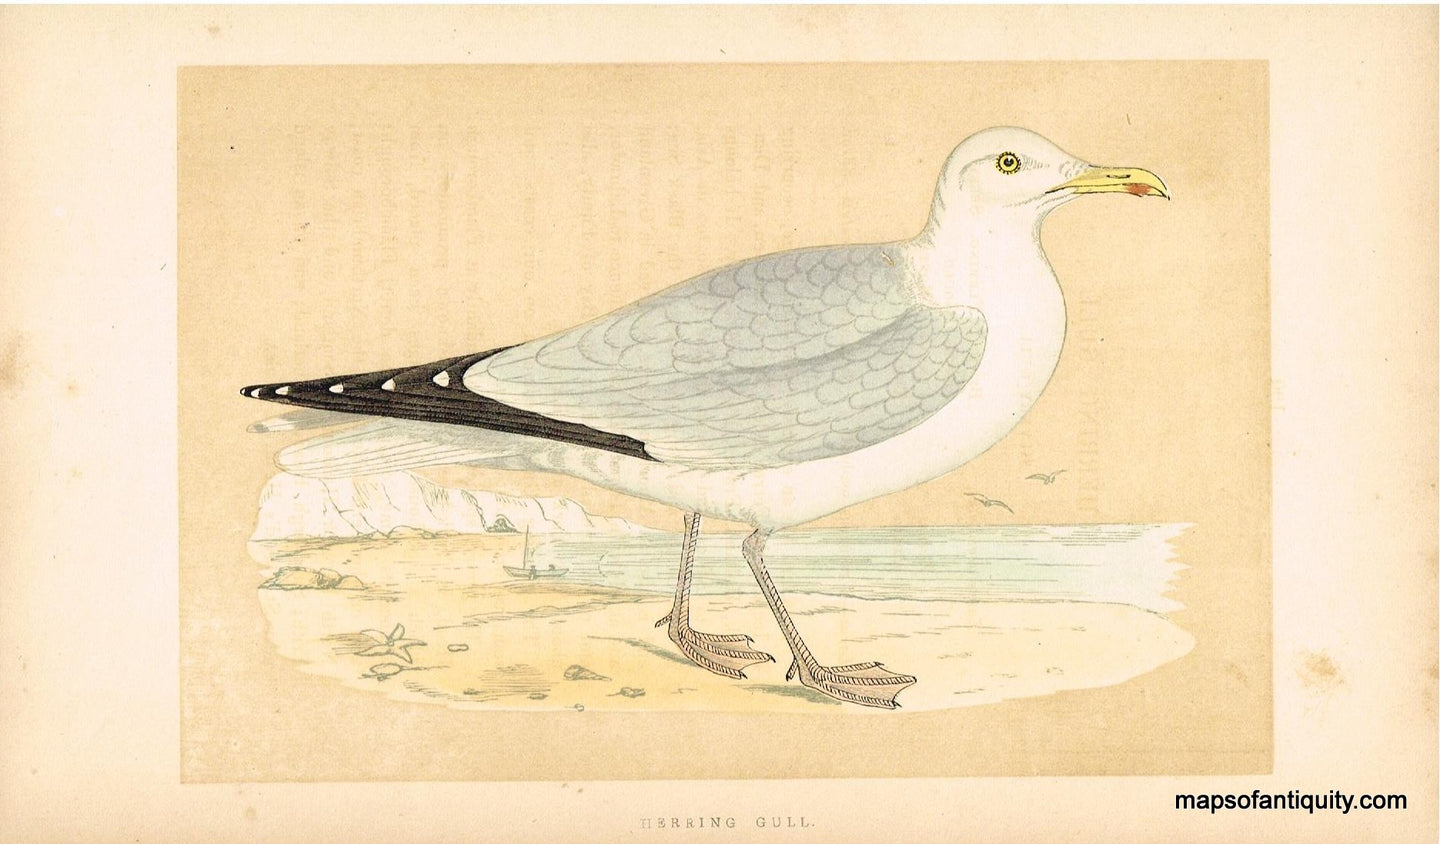 Antique-Hand-Colored-Engraved-Illustration-Herring-Gull-Morris-bird-Natural-History-Birds-1851-Morris-Maps-Of-Antiquity